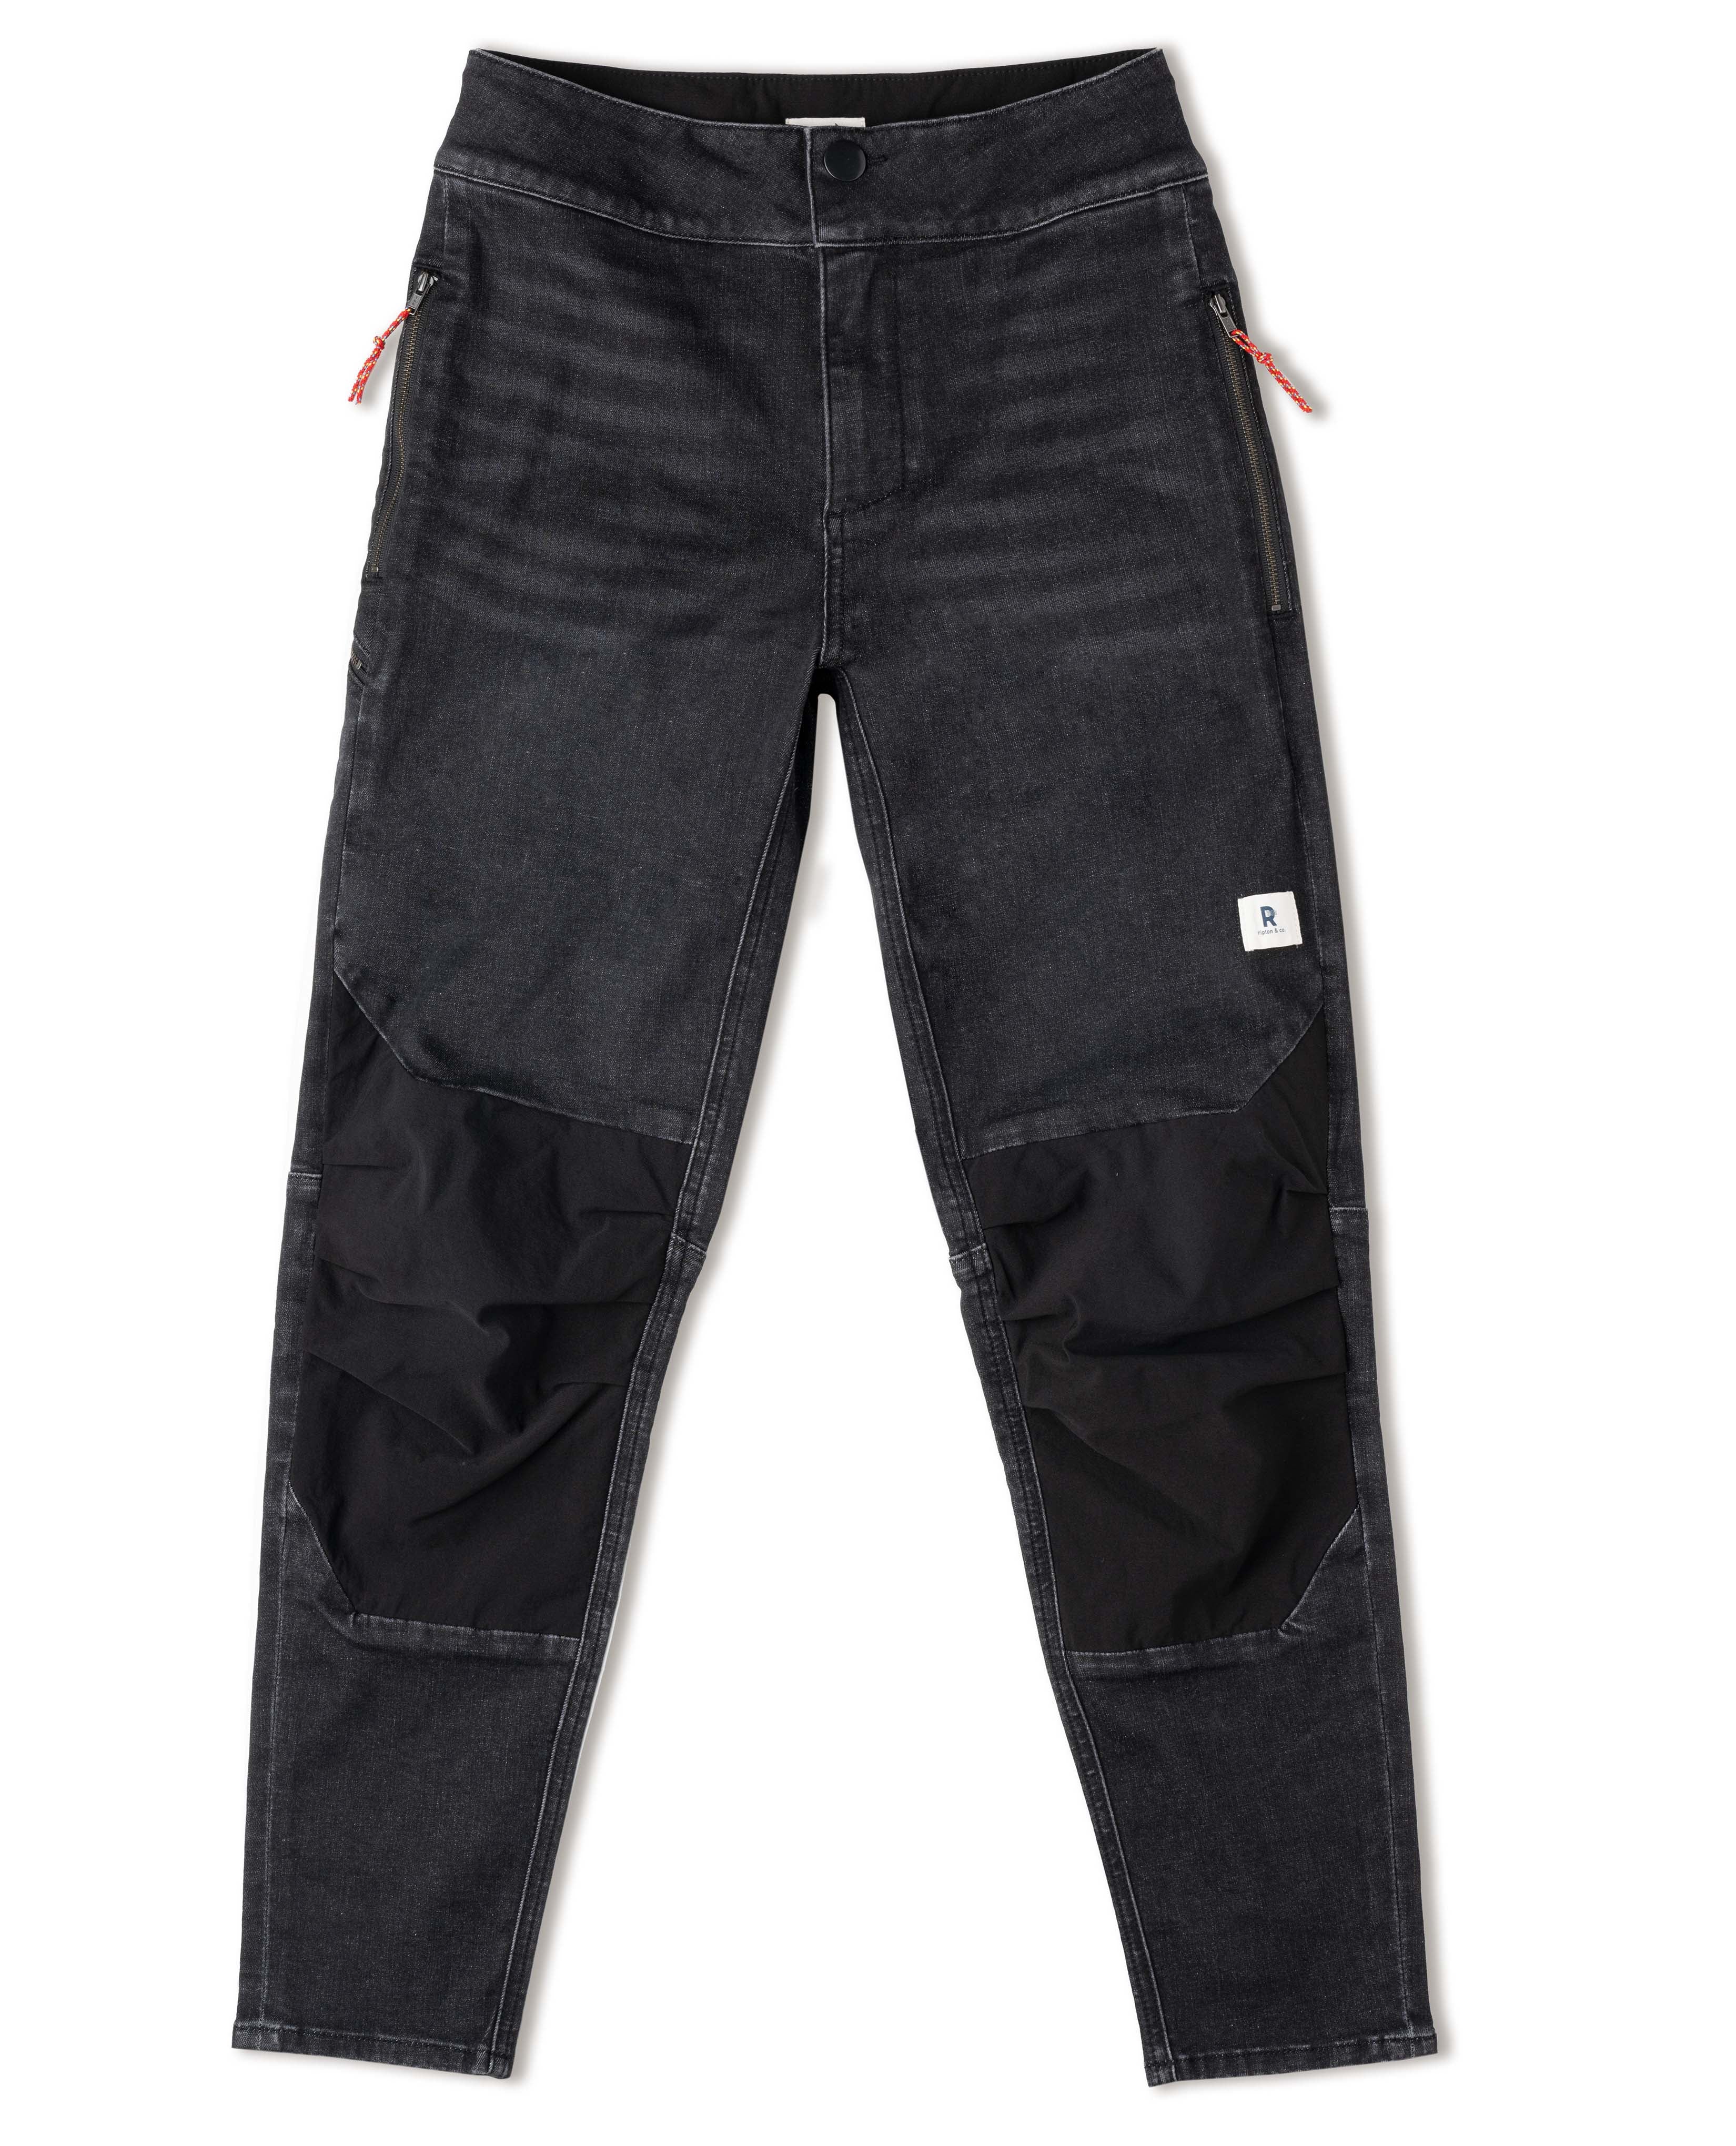 Pants and jeans Under Armour Hg Camo Lgs Black